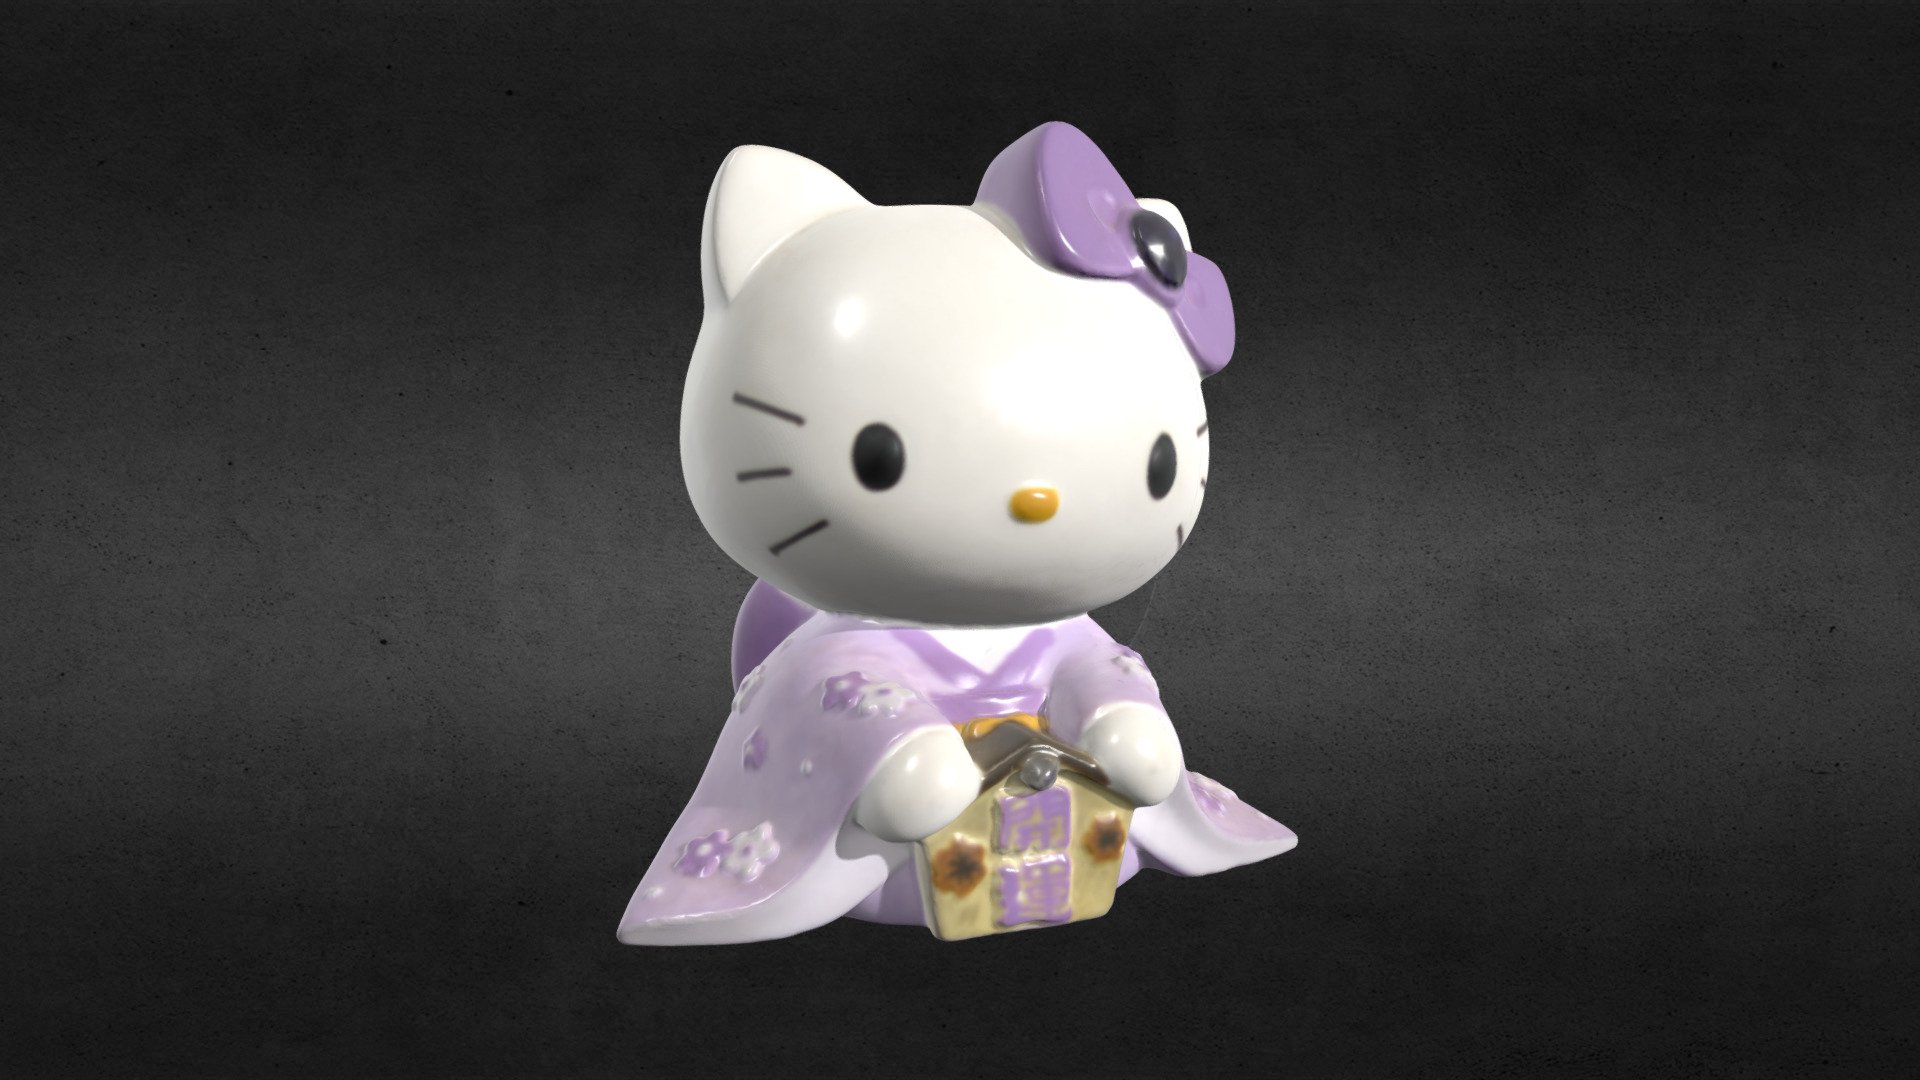 3D scanned Hello Kitty piggy bank using Creaform Peel 3D scanner.

Processed in Peel 3D software. The coin slot and base plug were deleted during cleanup.

Resolution 0.6m

Scan time 0.5 hour - 3D Scanned Hello Kitty in Kimono Figure - 3D model by ideabeans 3d model